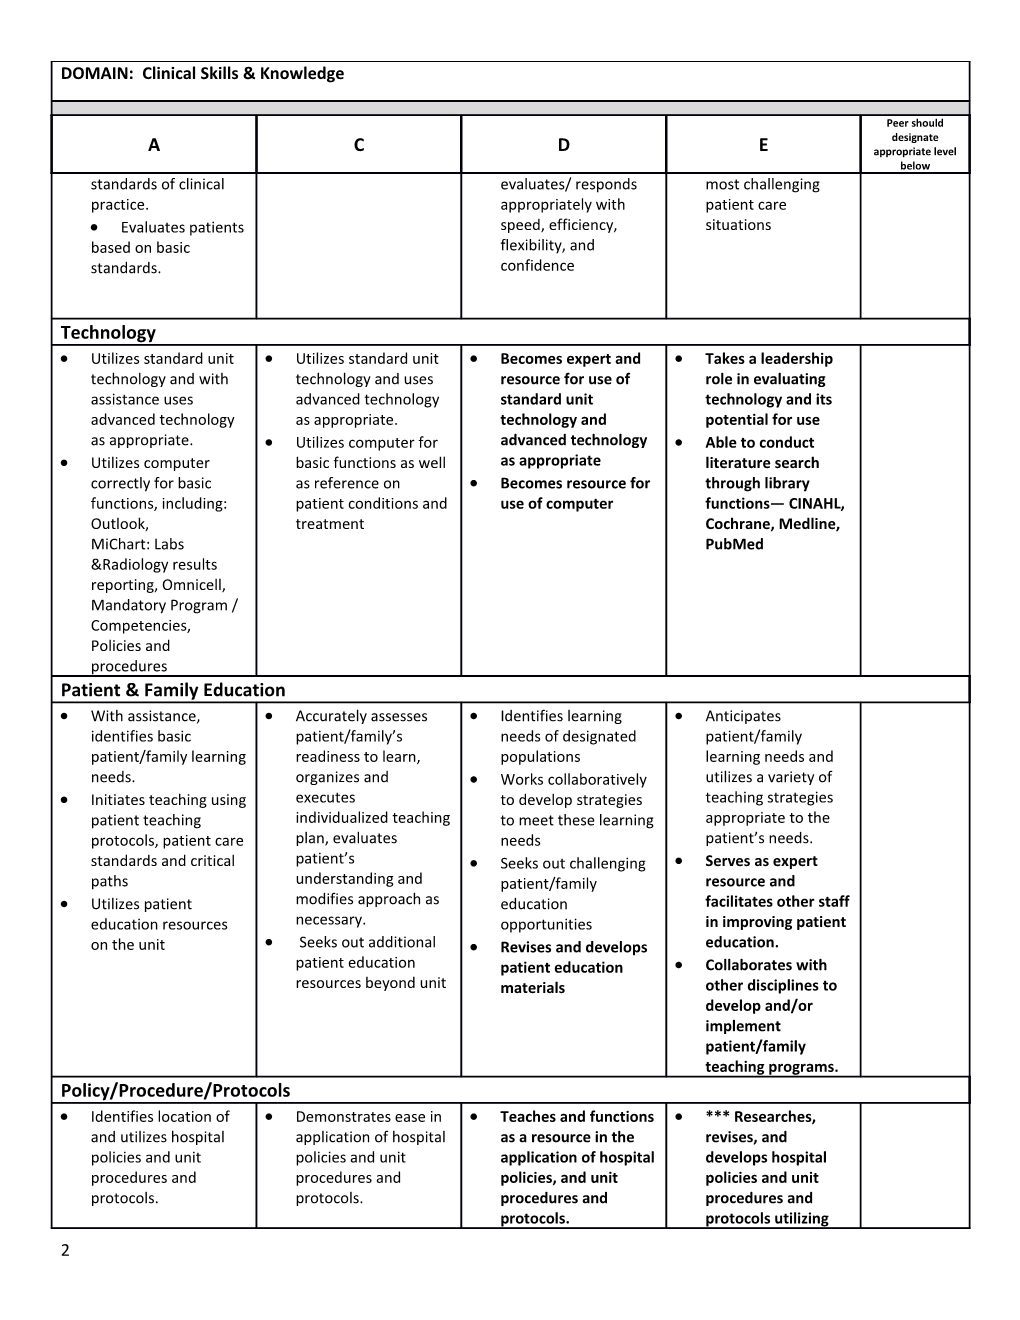 Framework RN Peer Input Tool for Annual Evaluation: Clinical Skills and Knowledge